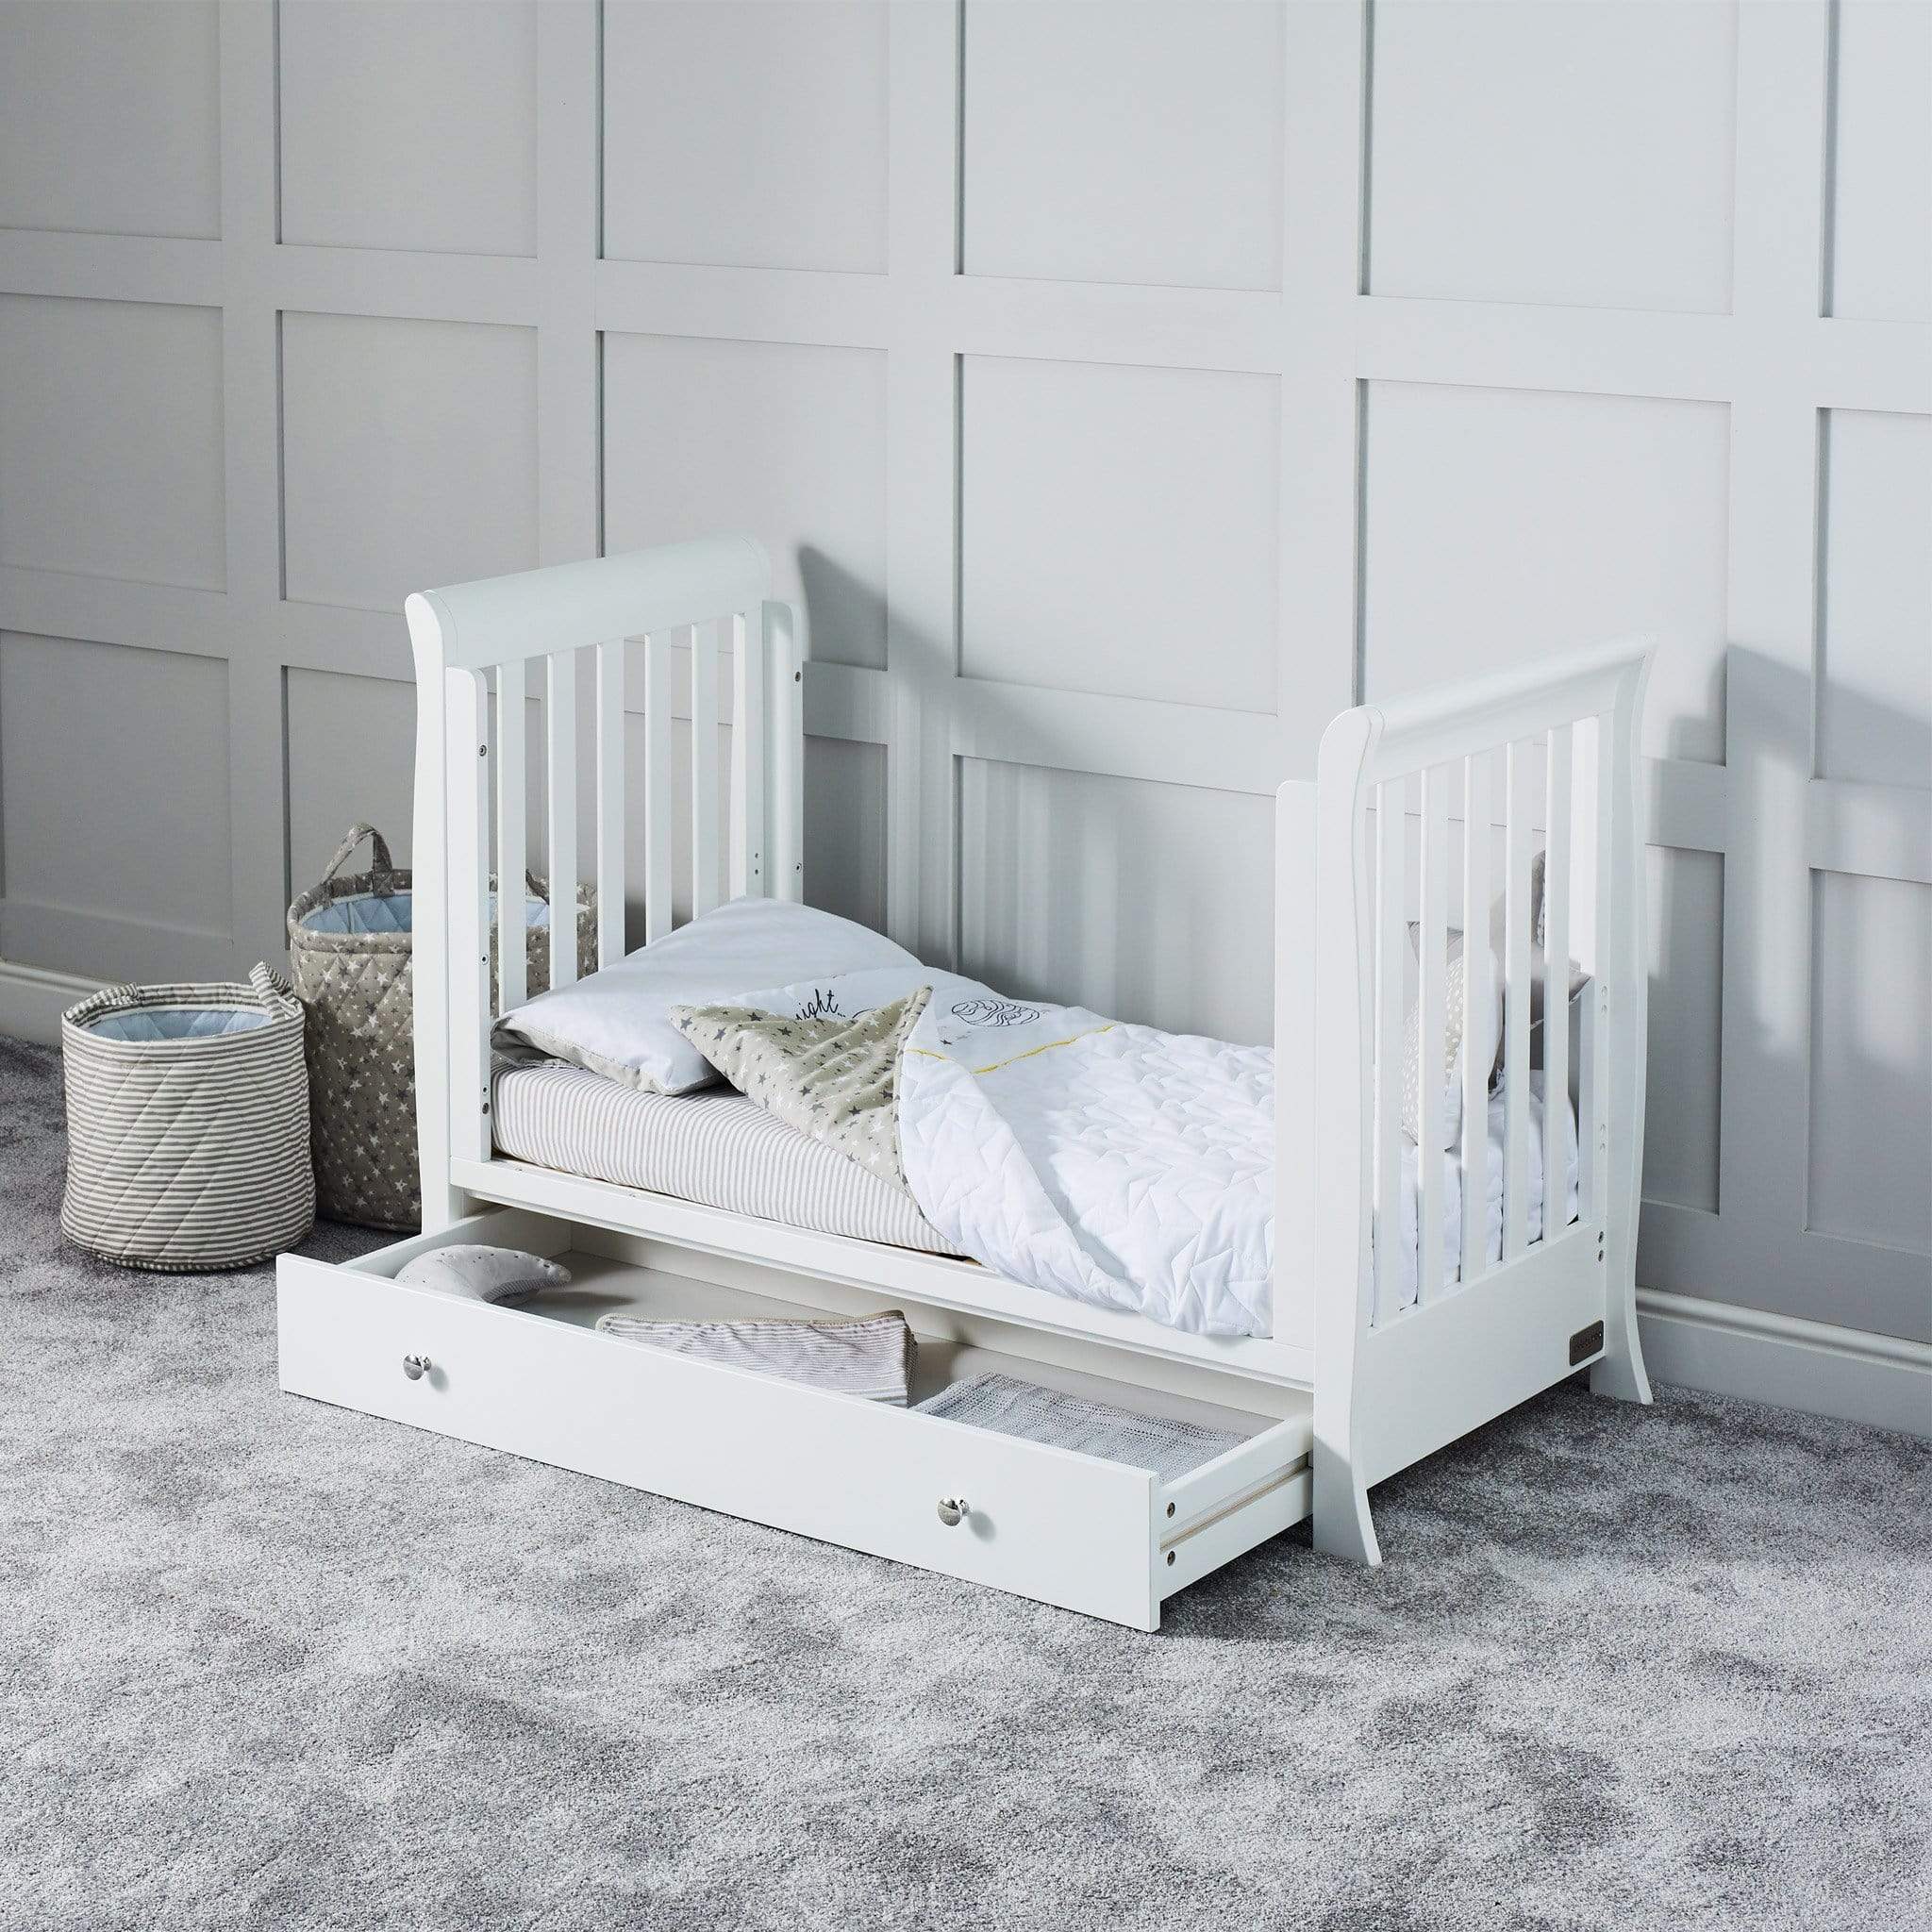 Ickle Bubba Cot Beds Ickle Bubba Snowdon 4 in 1 Mini Cot Bed - White